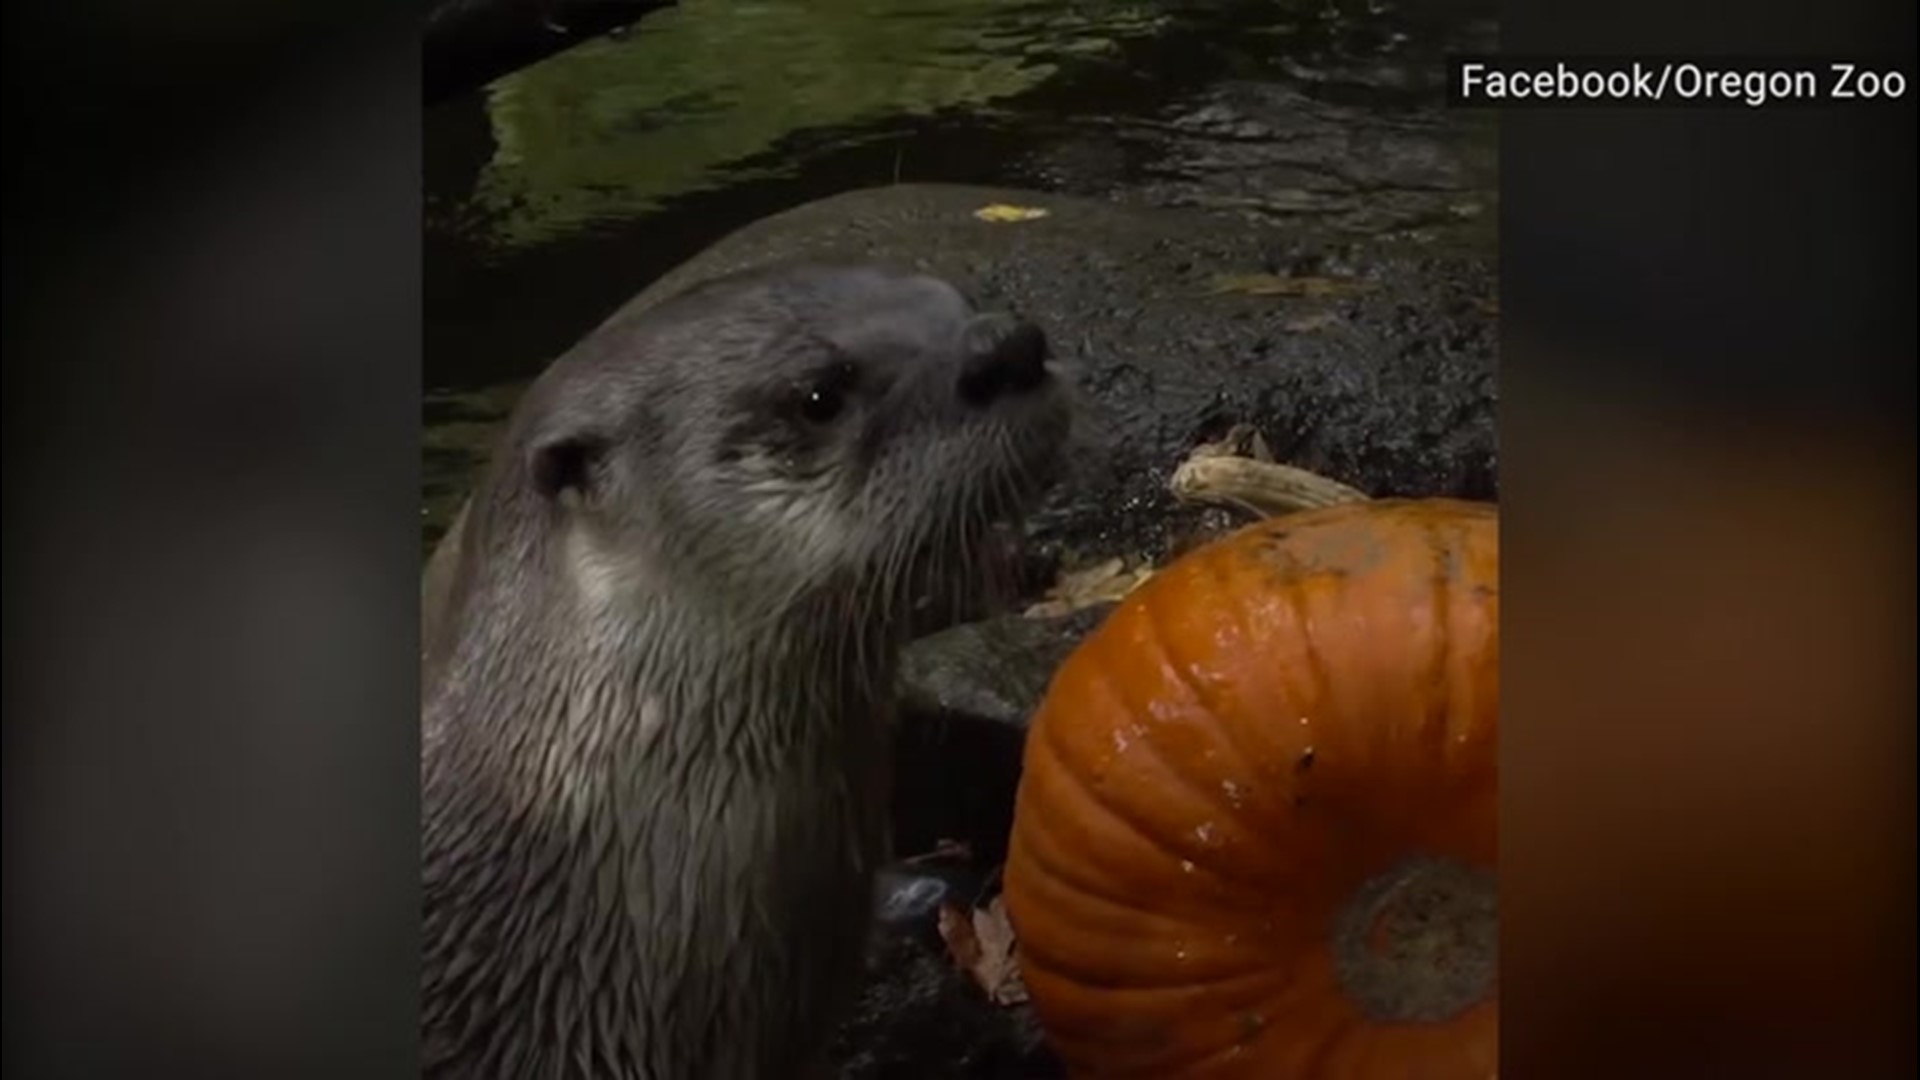 Animals at the Oregon Zoo in Portland enjoyed some time with pumpkins and jack-o'-lanterns on Oct. 2.